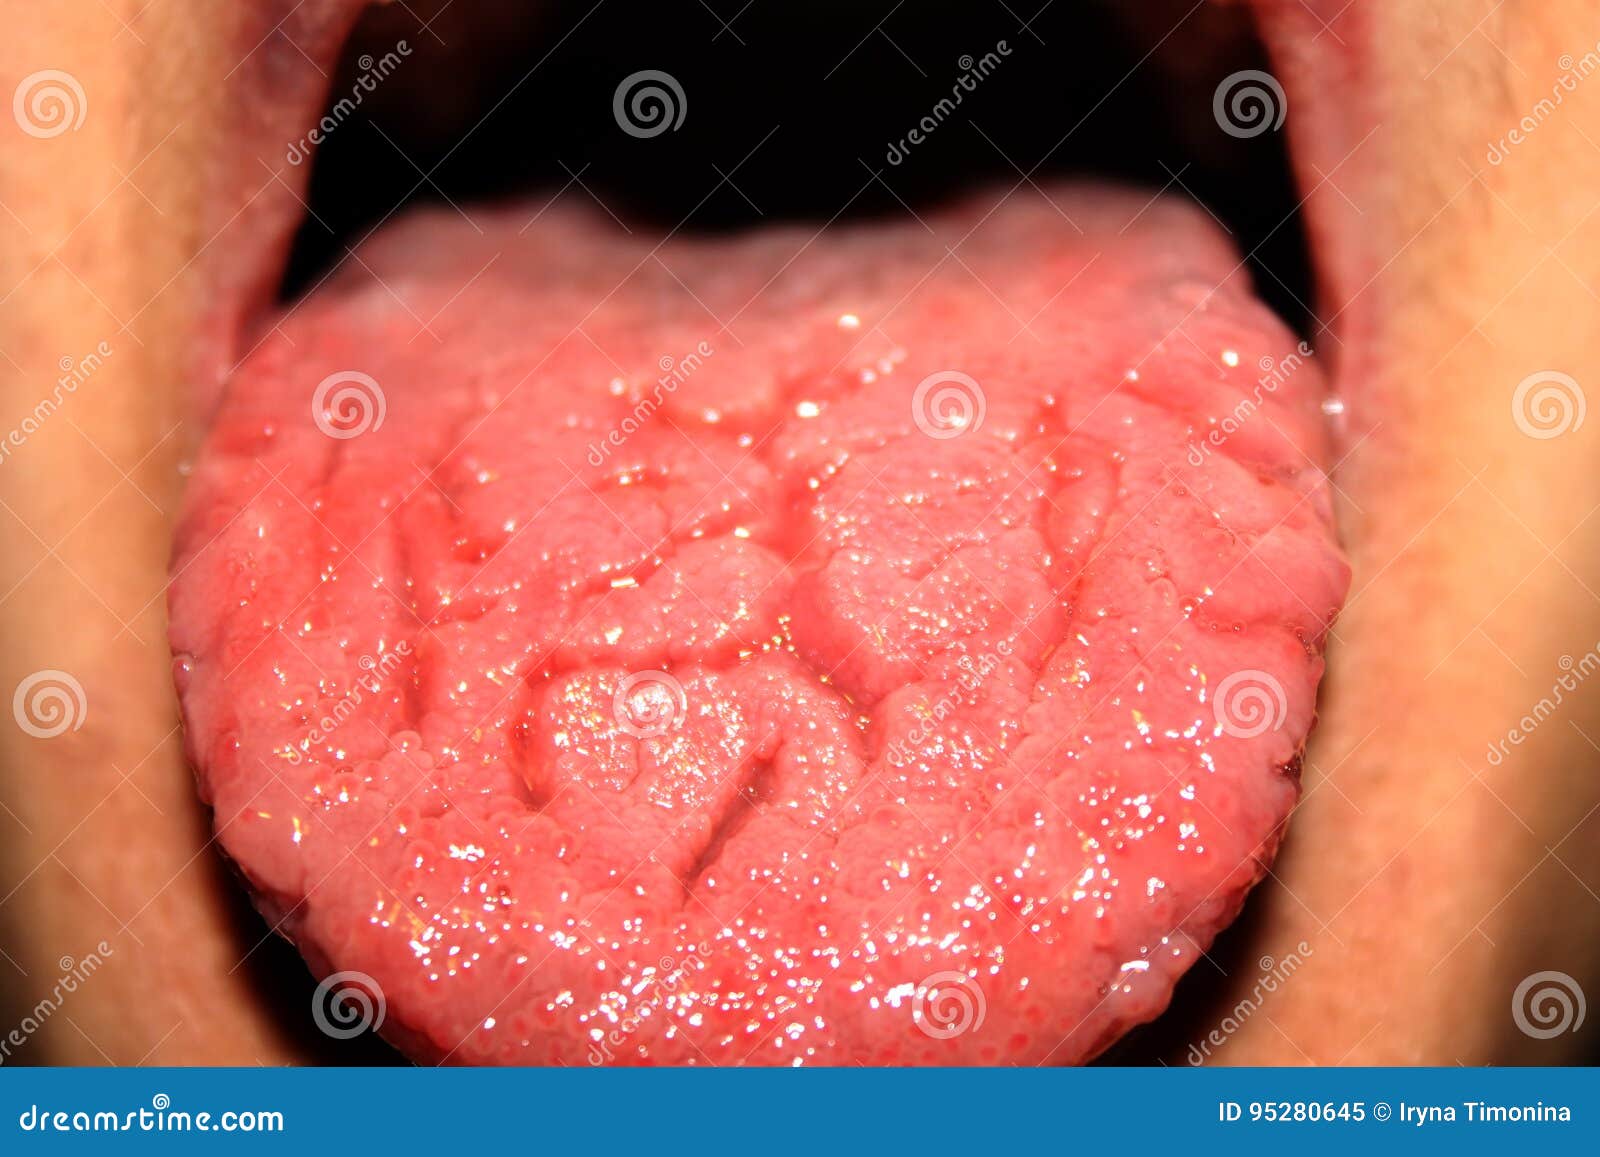 Candidiasis In The Tongue White Coating Thrush Stock